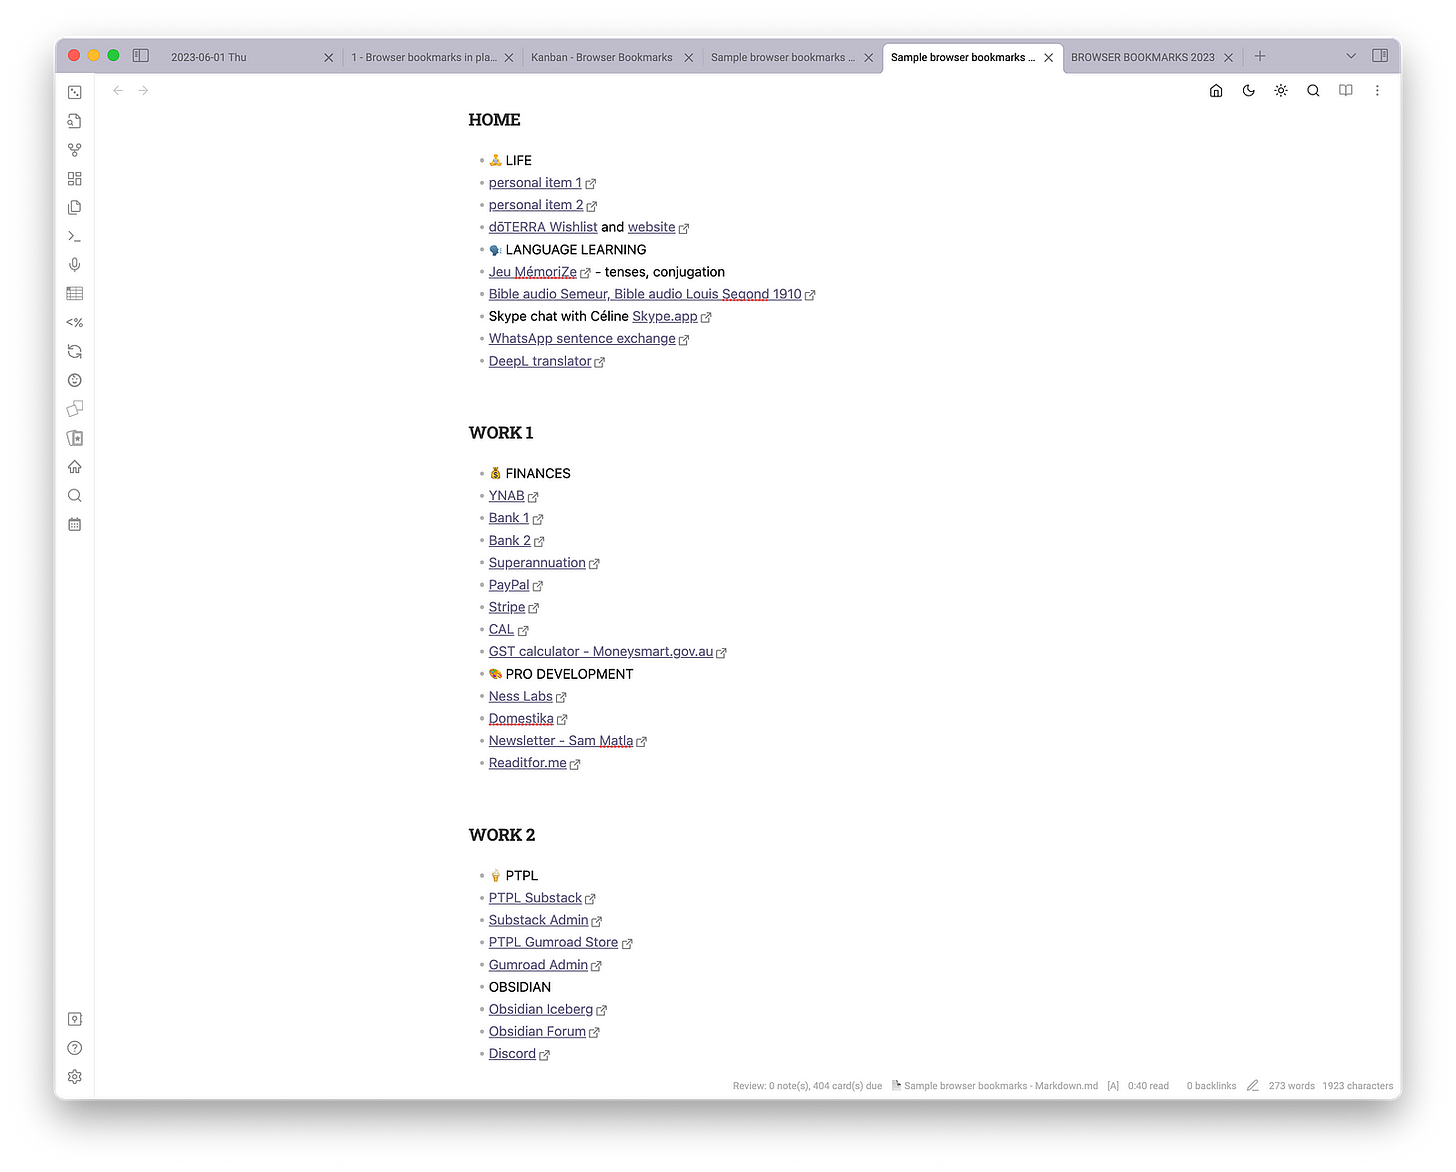 Markdown list of browser bookmarks on an Obsidian window with a white background. There are 3 headers: Home, Work 1, and Work 2, with a number of web links listed as bullet points underneath each one.